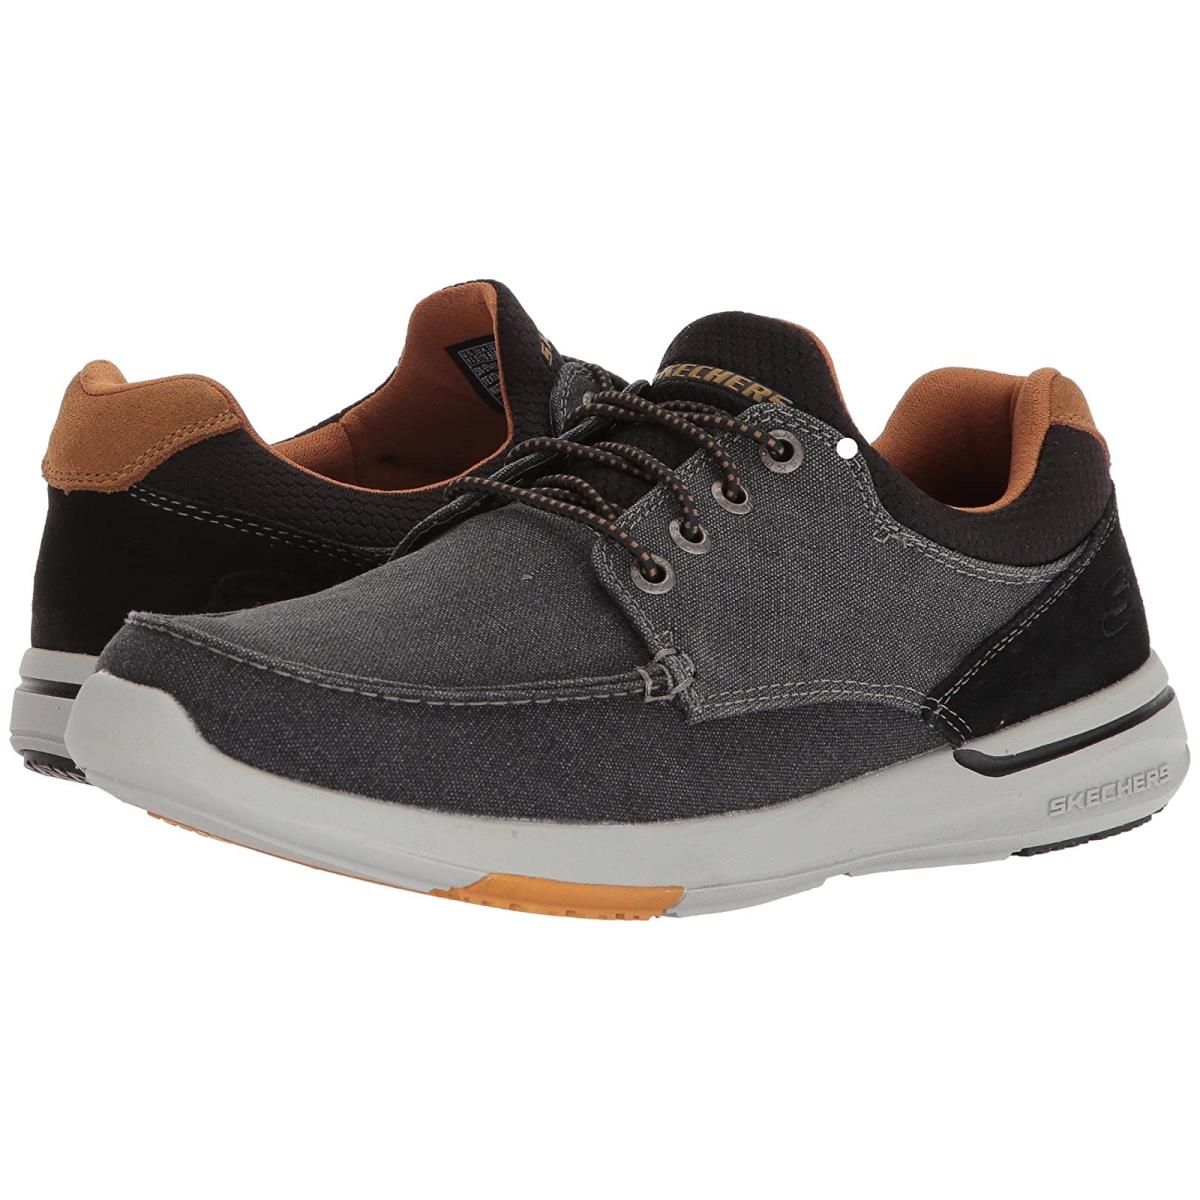 Man`s Boat Shoes Skechers Relaxed Fit: Elent - Mosen Black